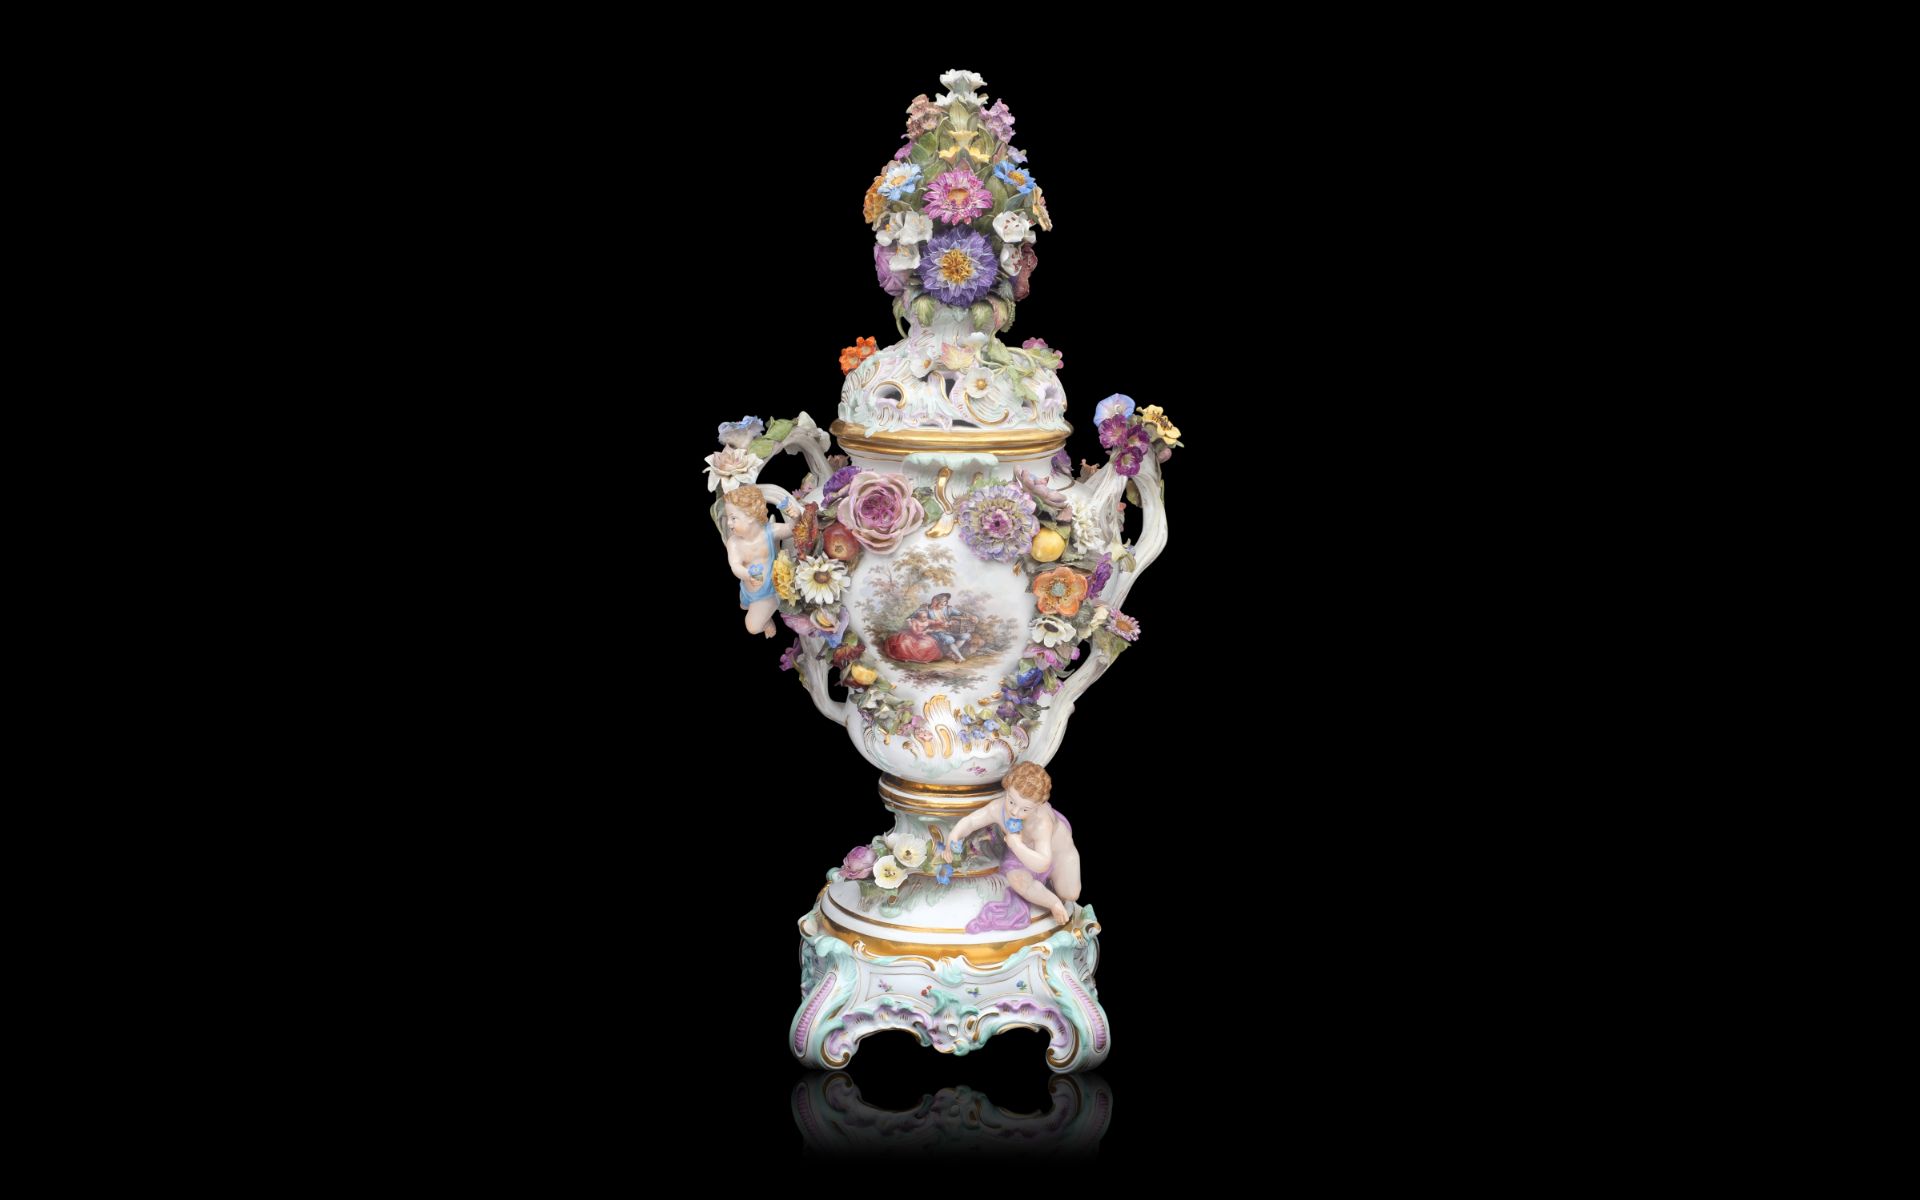 A FINE MONUMENTAL FLOWER ENCRUSTED MEISSEN VASE AND COVER, LATE 19TH / EARLY 20TH CENTURY